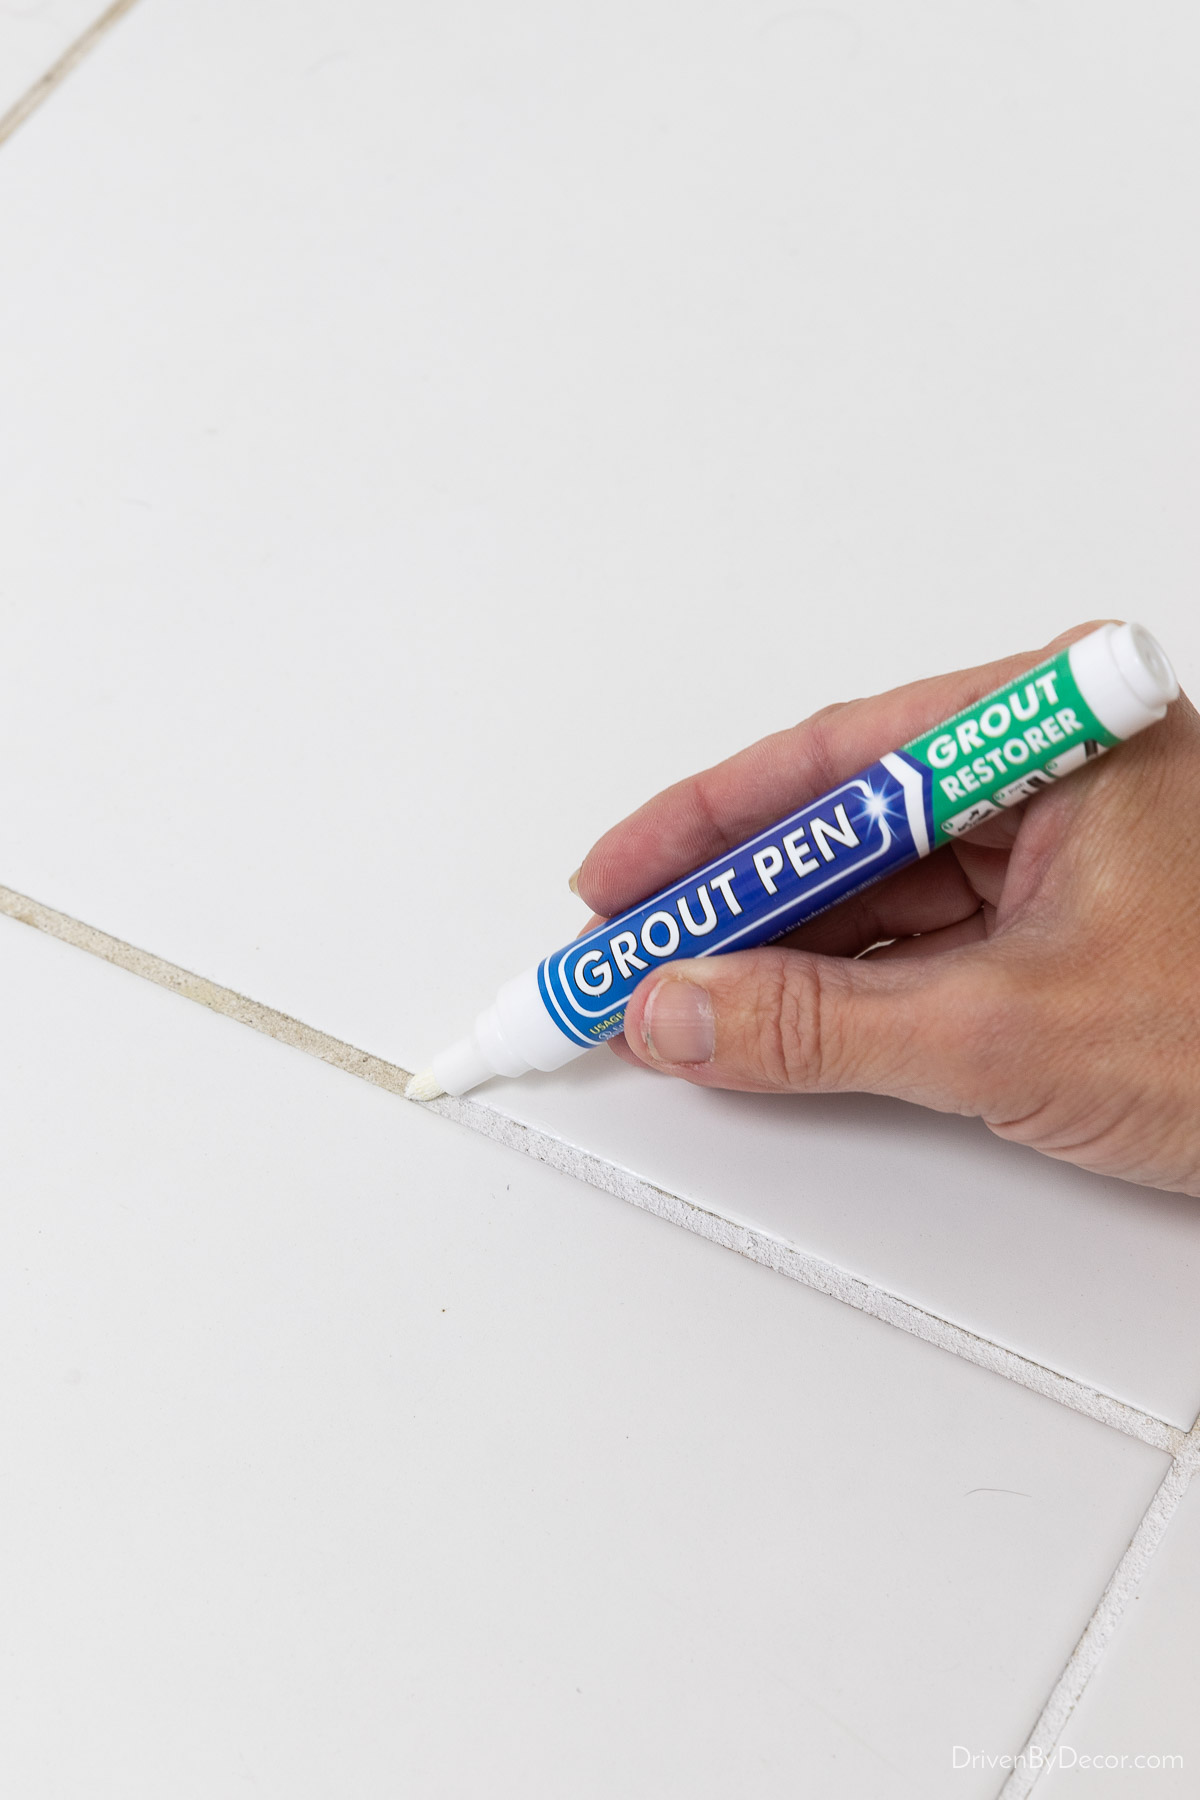 Using a grout pen to whiten grout